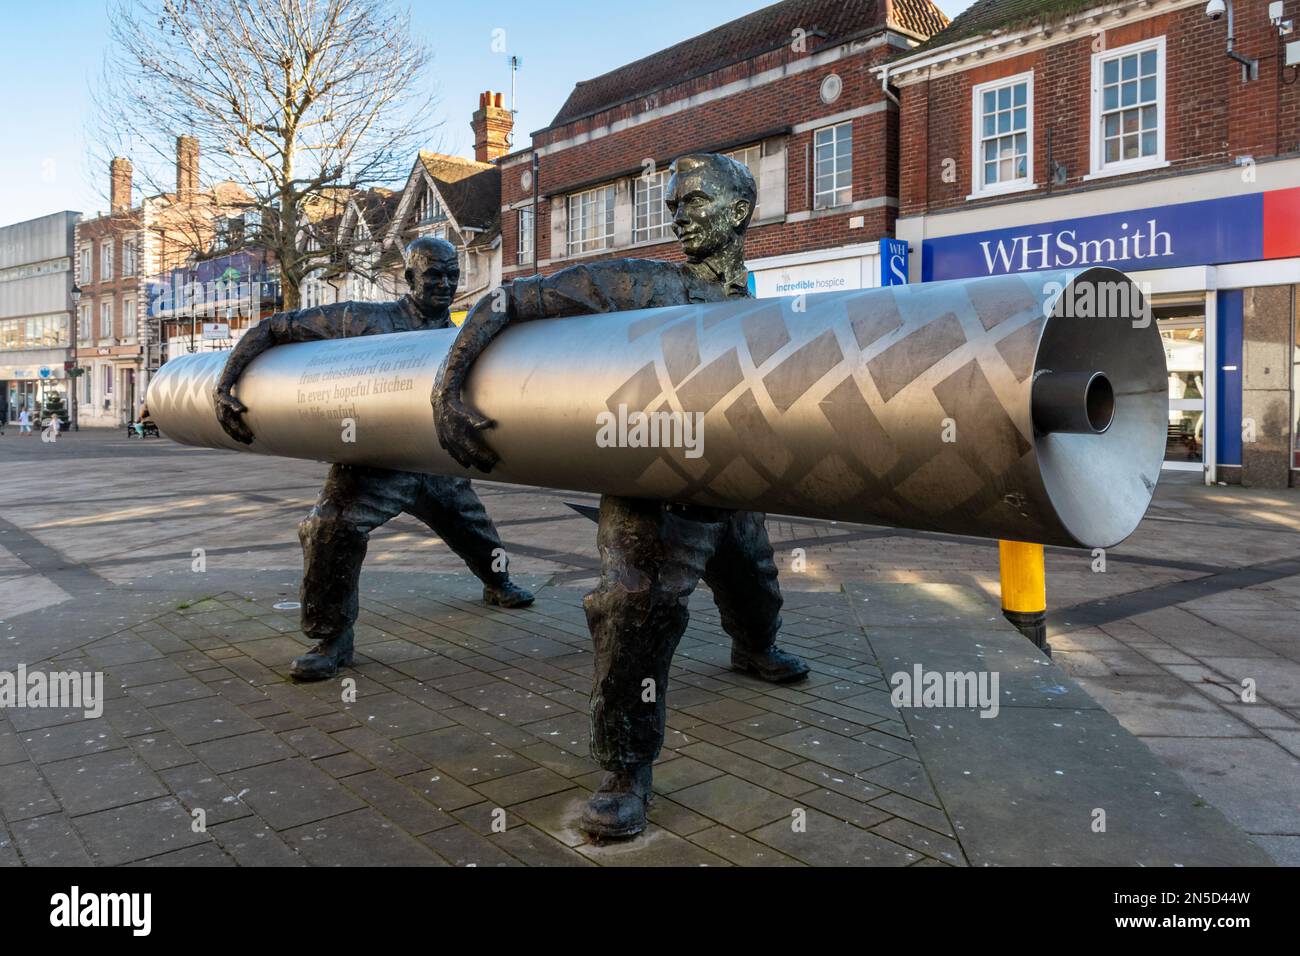 David Annand sculpture of two men carrying a roll of lino, called Roll out the Lino, Staines-upon-Thames High Street, Surrey, UK Stock Photo